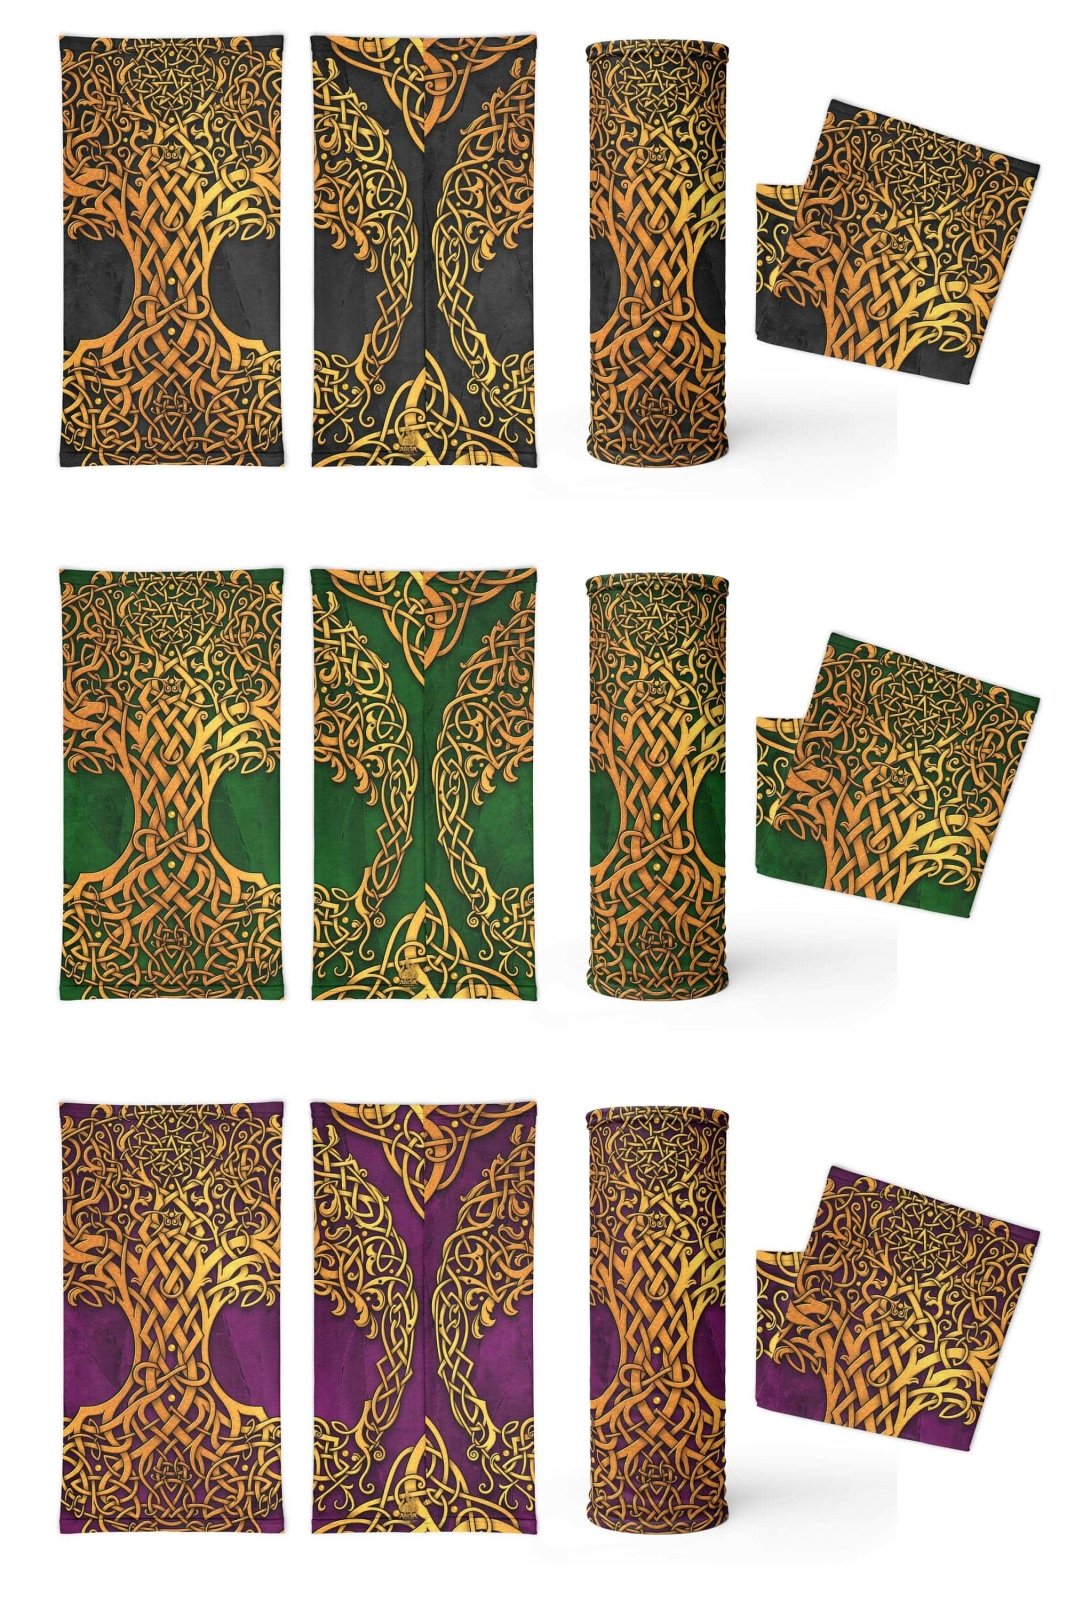 Celtic Neck Gaiter, Face Mask, Head Covering, Pagan Outfit, Tree of Life, Witchy - Gold & 3 Color Options - Abysm Internal